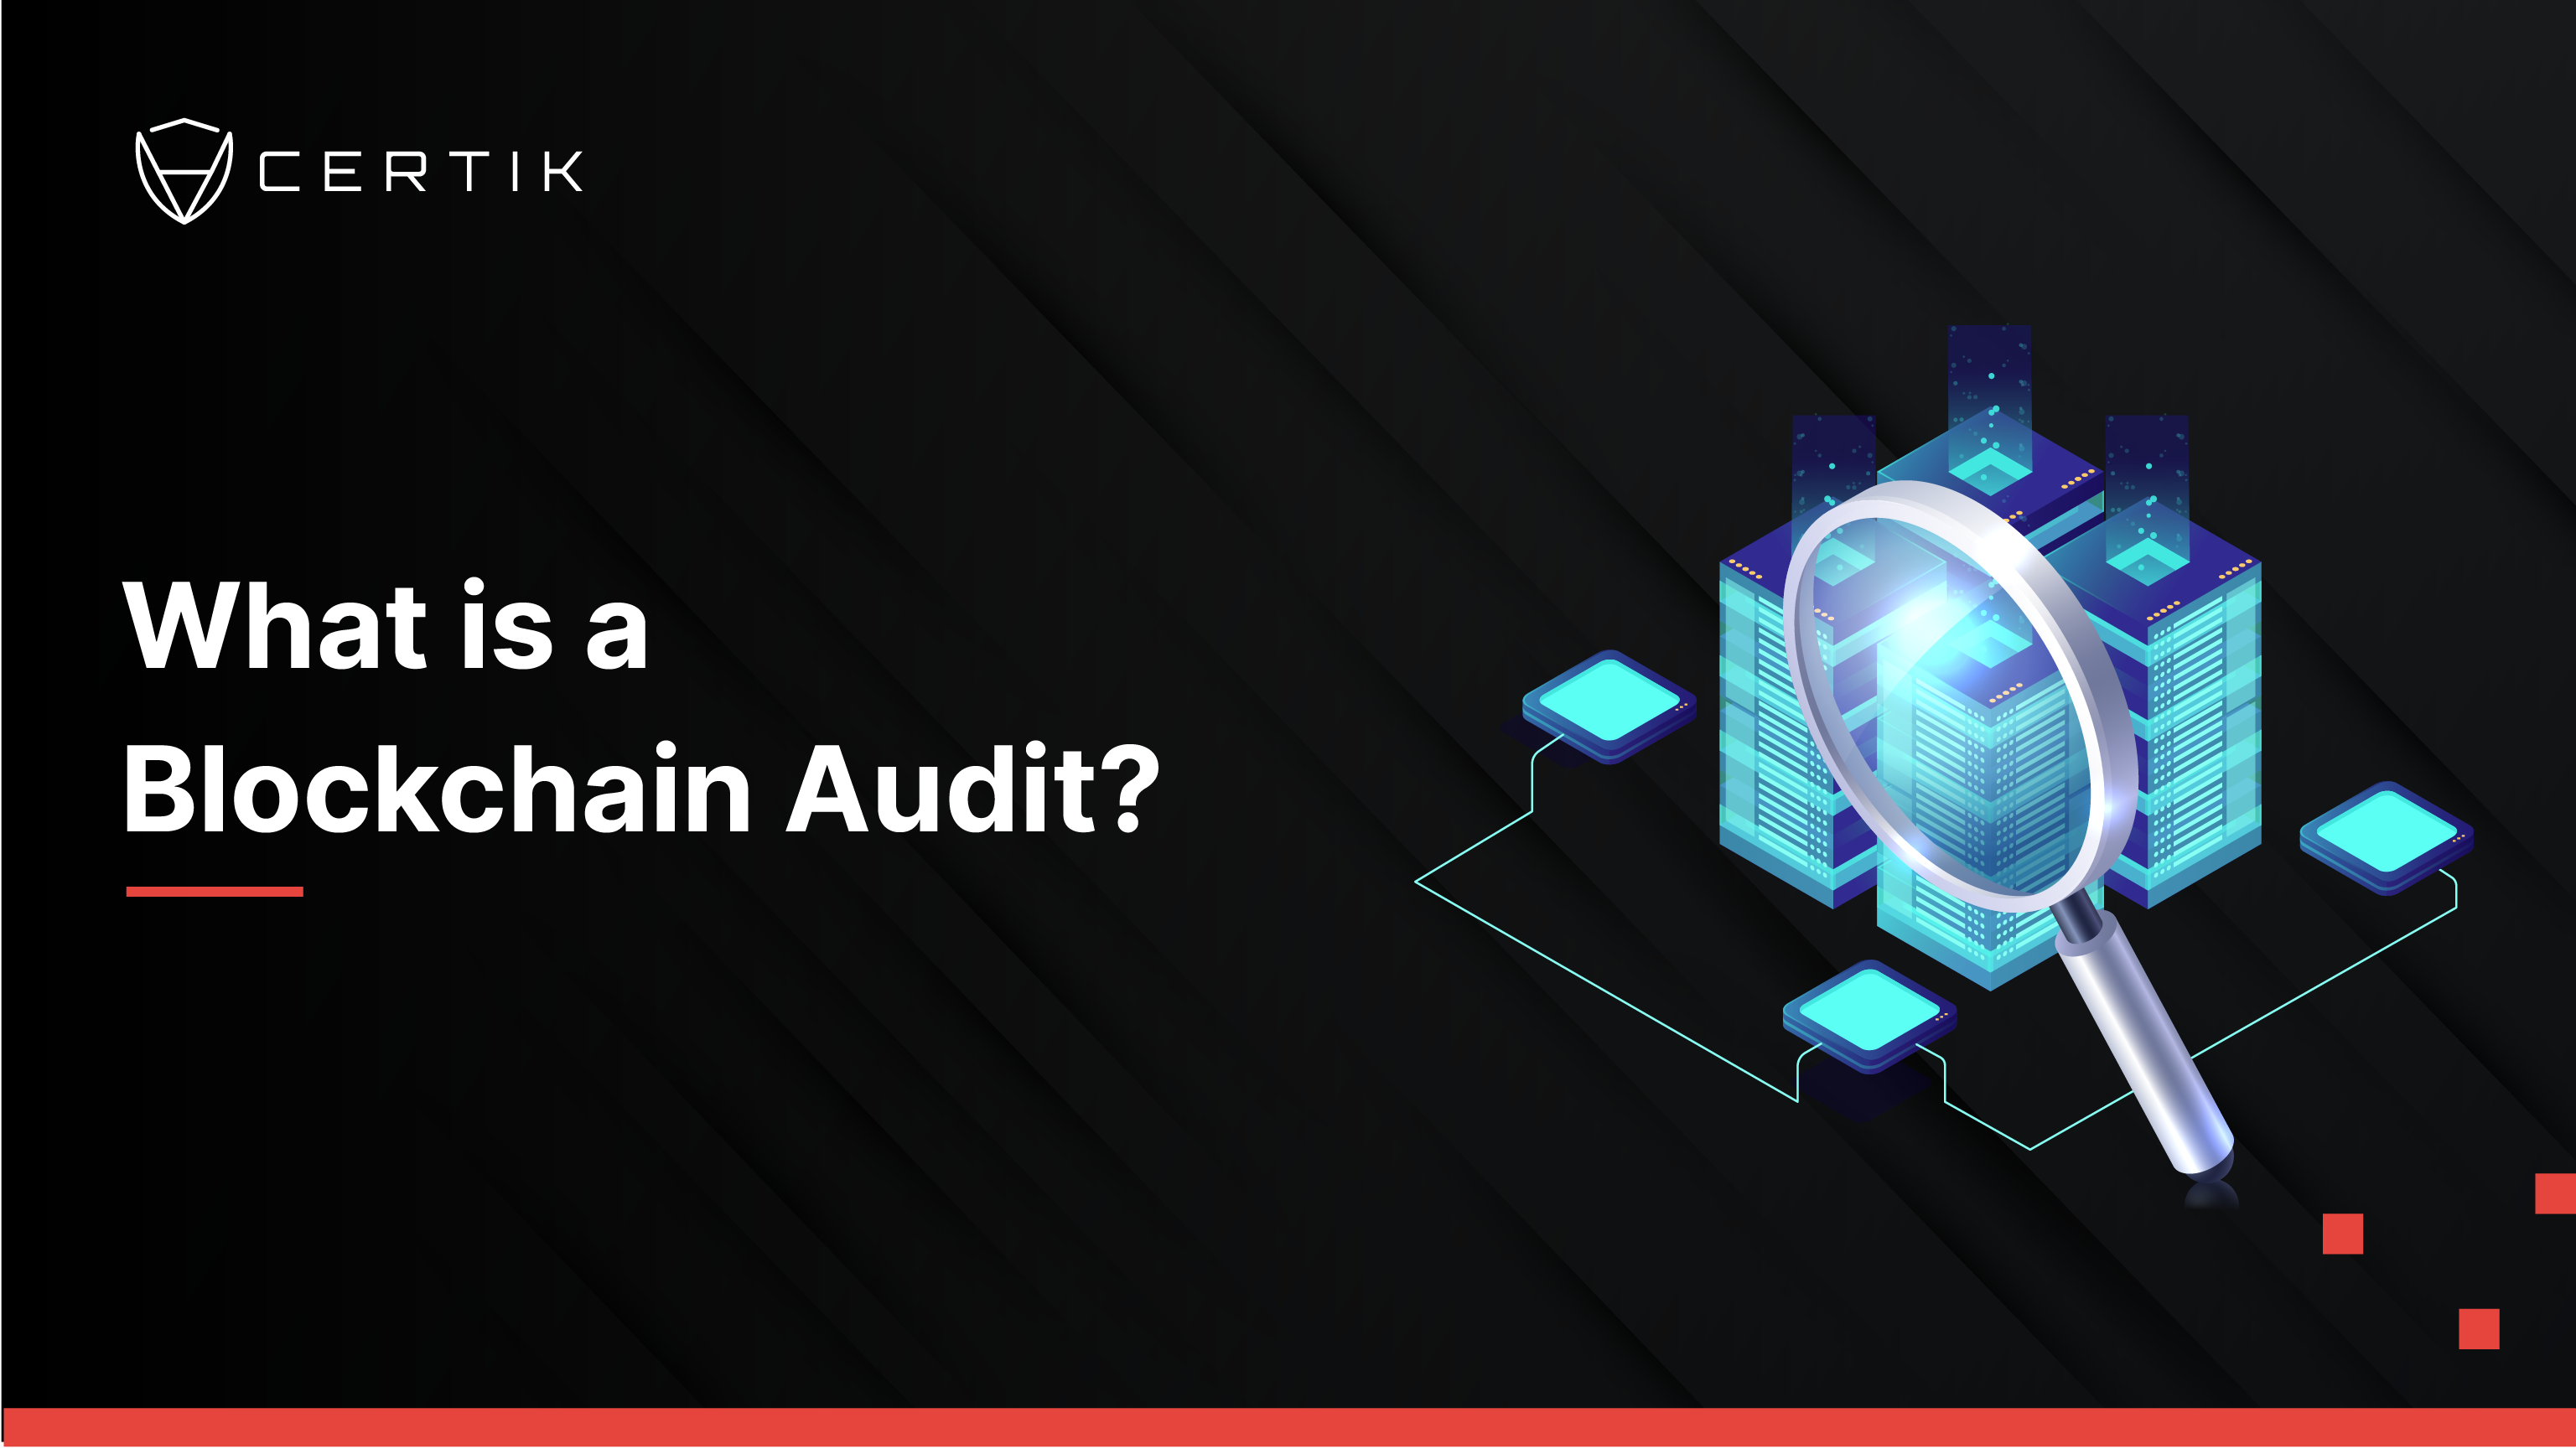 What is a Blockchain Audit and How Does It Work?